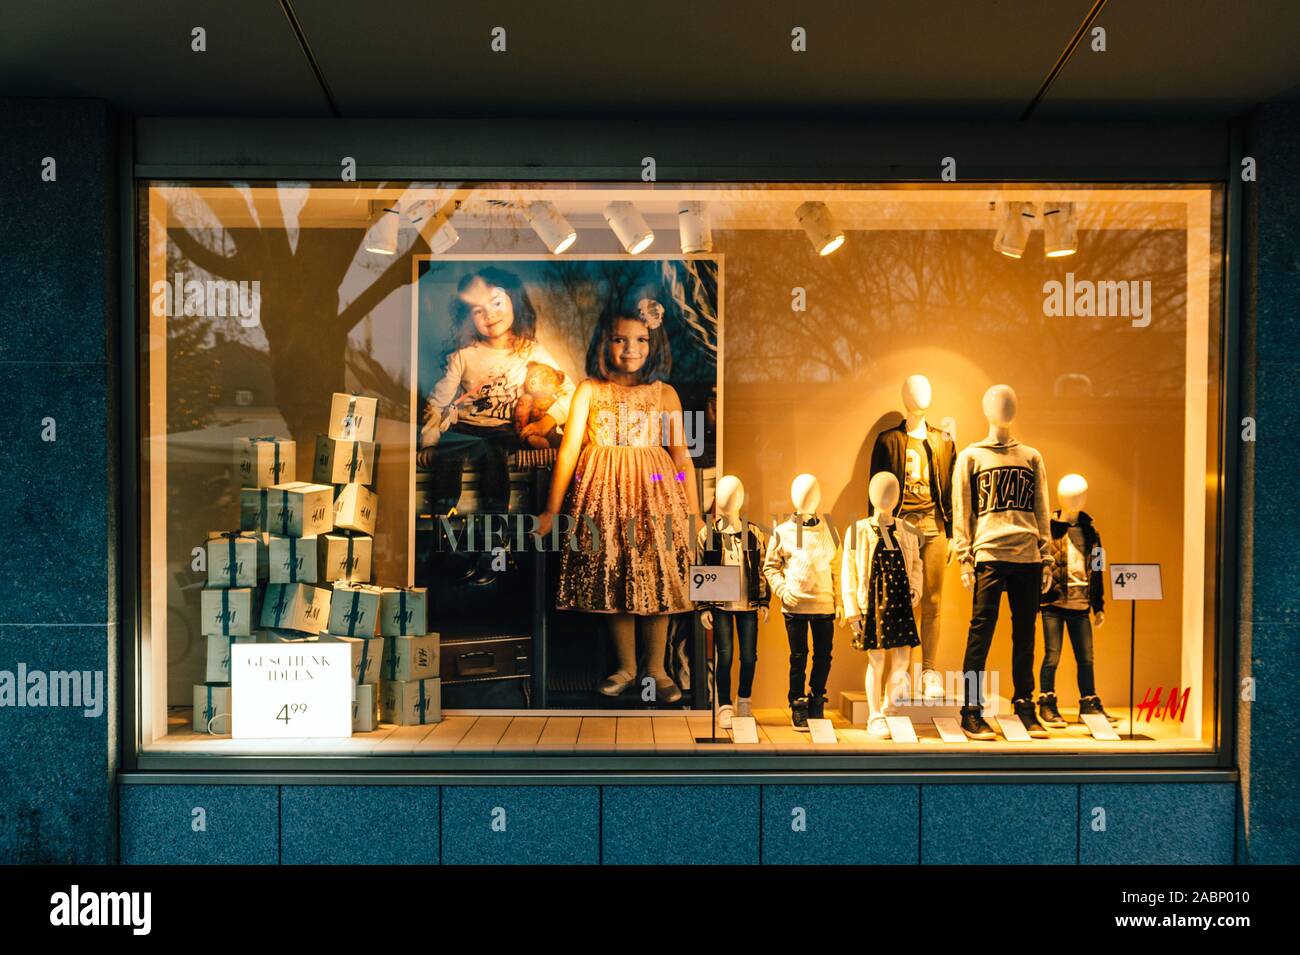 Kehl, Germany - Dec 13, 2016: Merry Christmas text on the H and M store  with multiple mannequins of adults and kids Stock Photo - Alamy